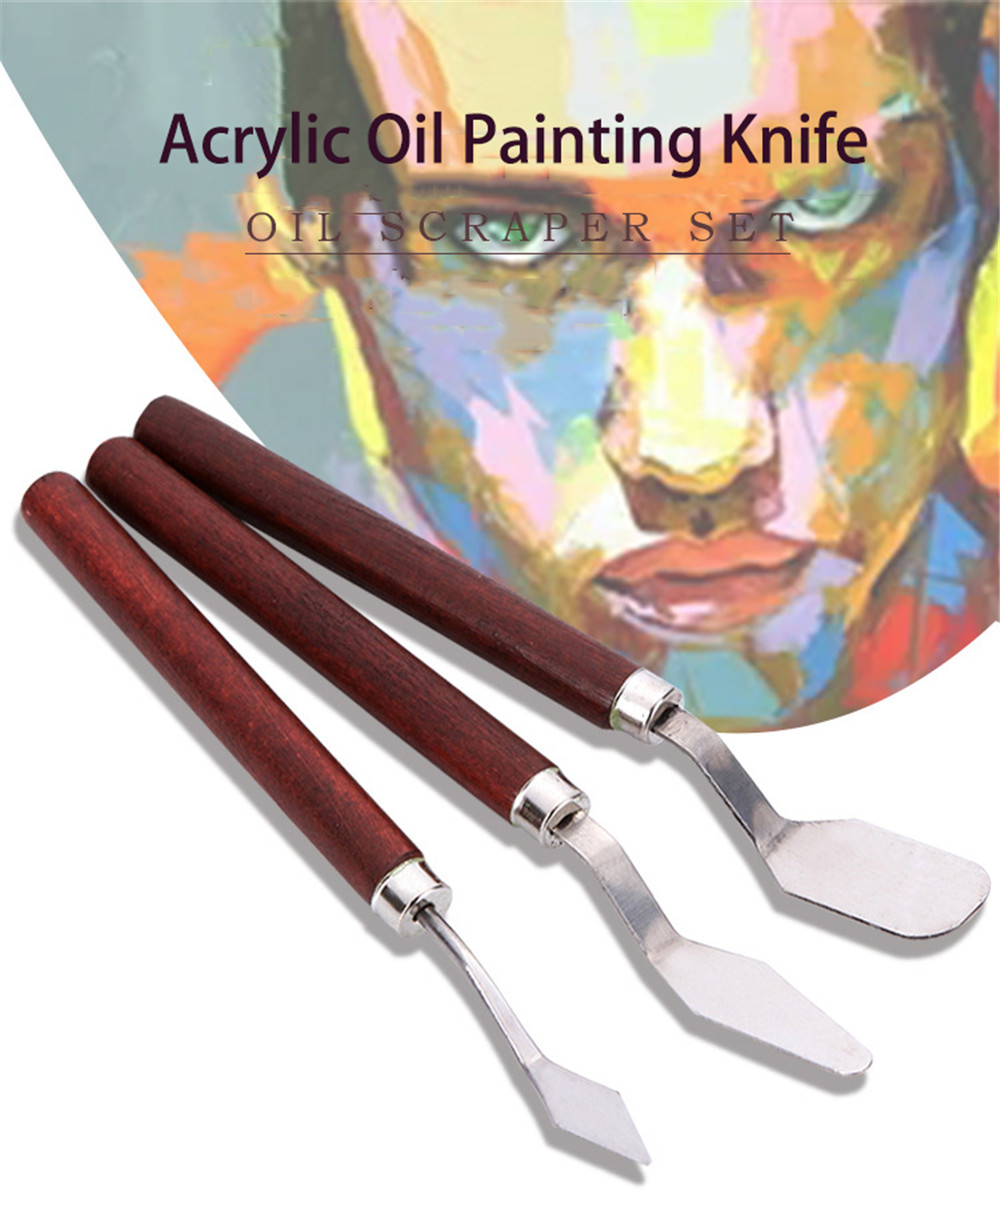 zhuting-GD-03-Acrylic-Painting-Knife-3-PCS-Watercolor-Paint-Stationery-School-Students-Art-Painting--1718235-1